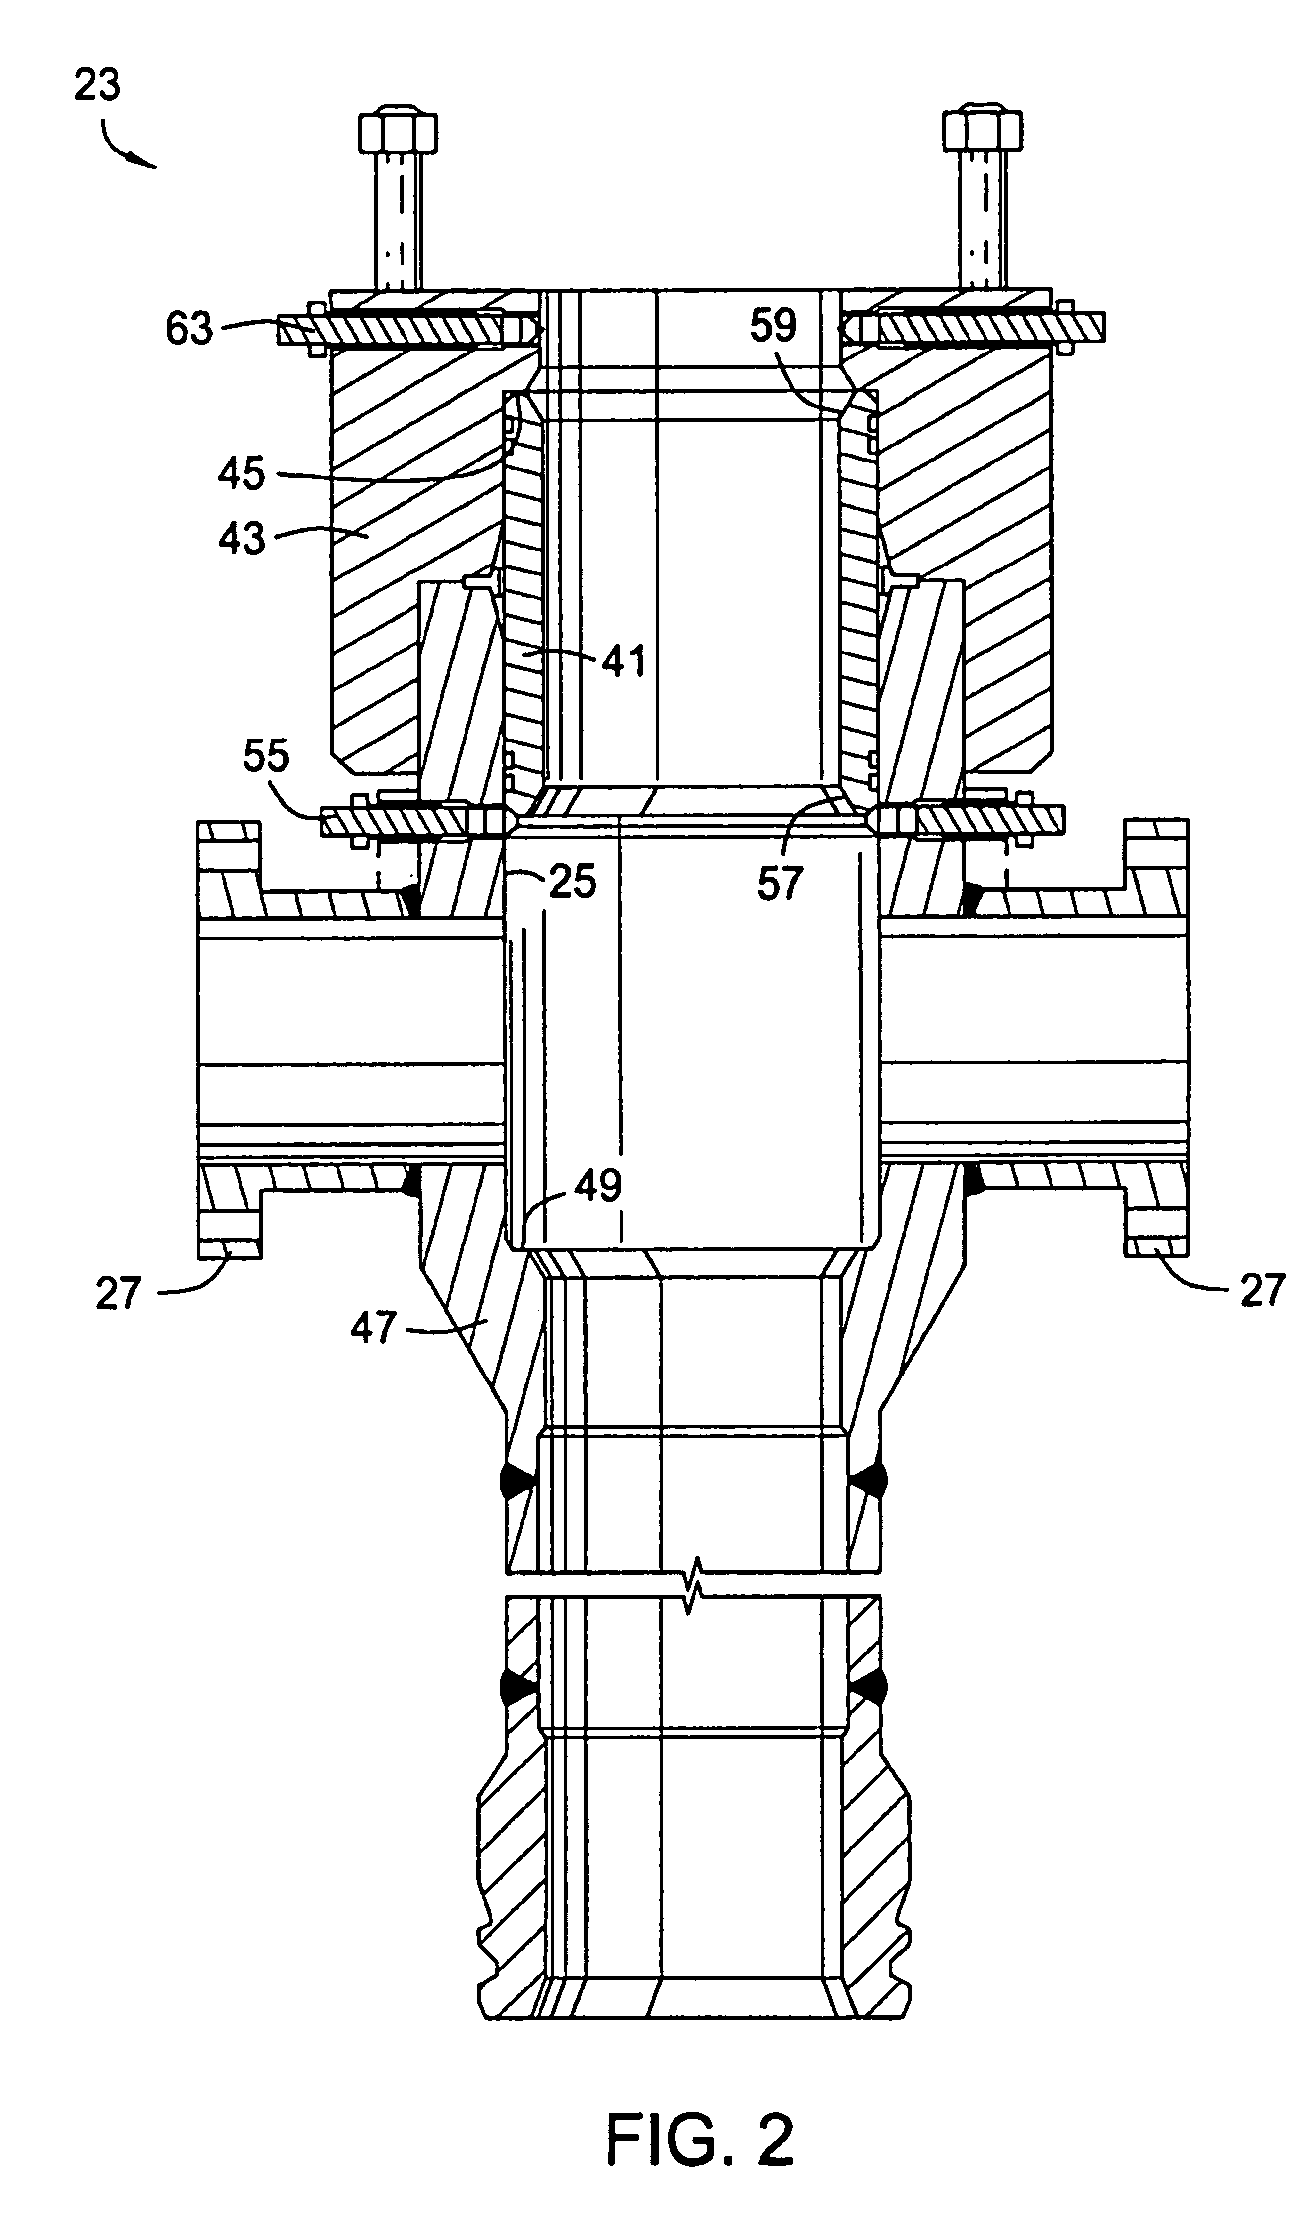 System, method, and apparatus for accessing outlets in a two-stage diverter spool assembly